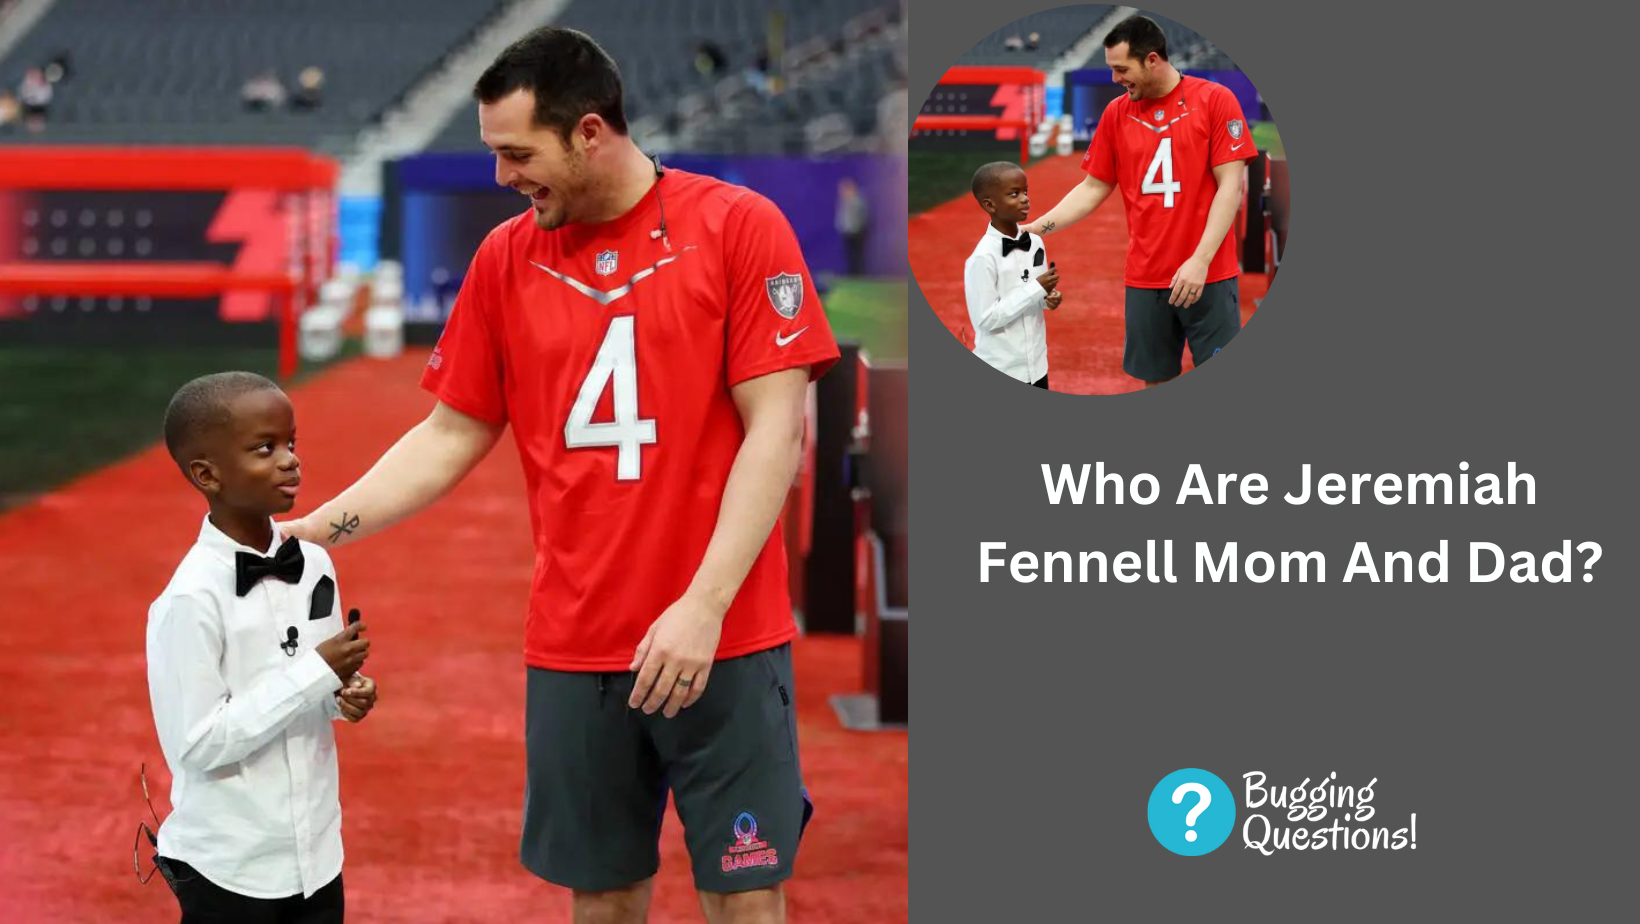 Who Are Jeremiah Fennell Mom And Dad?